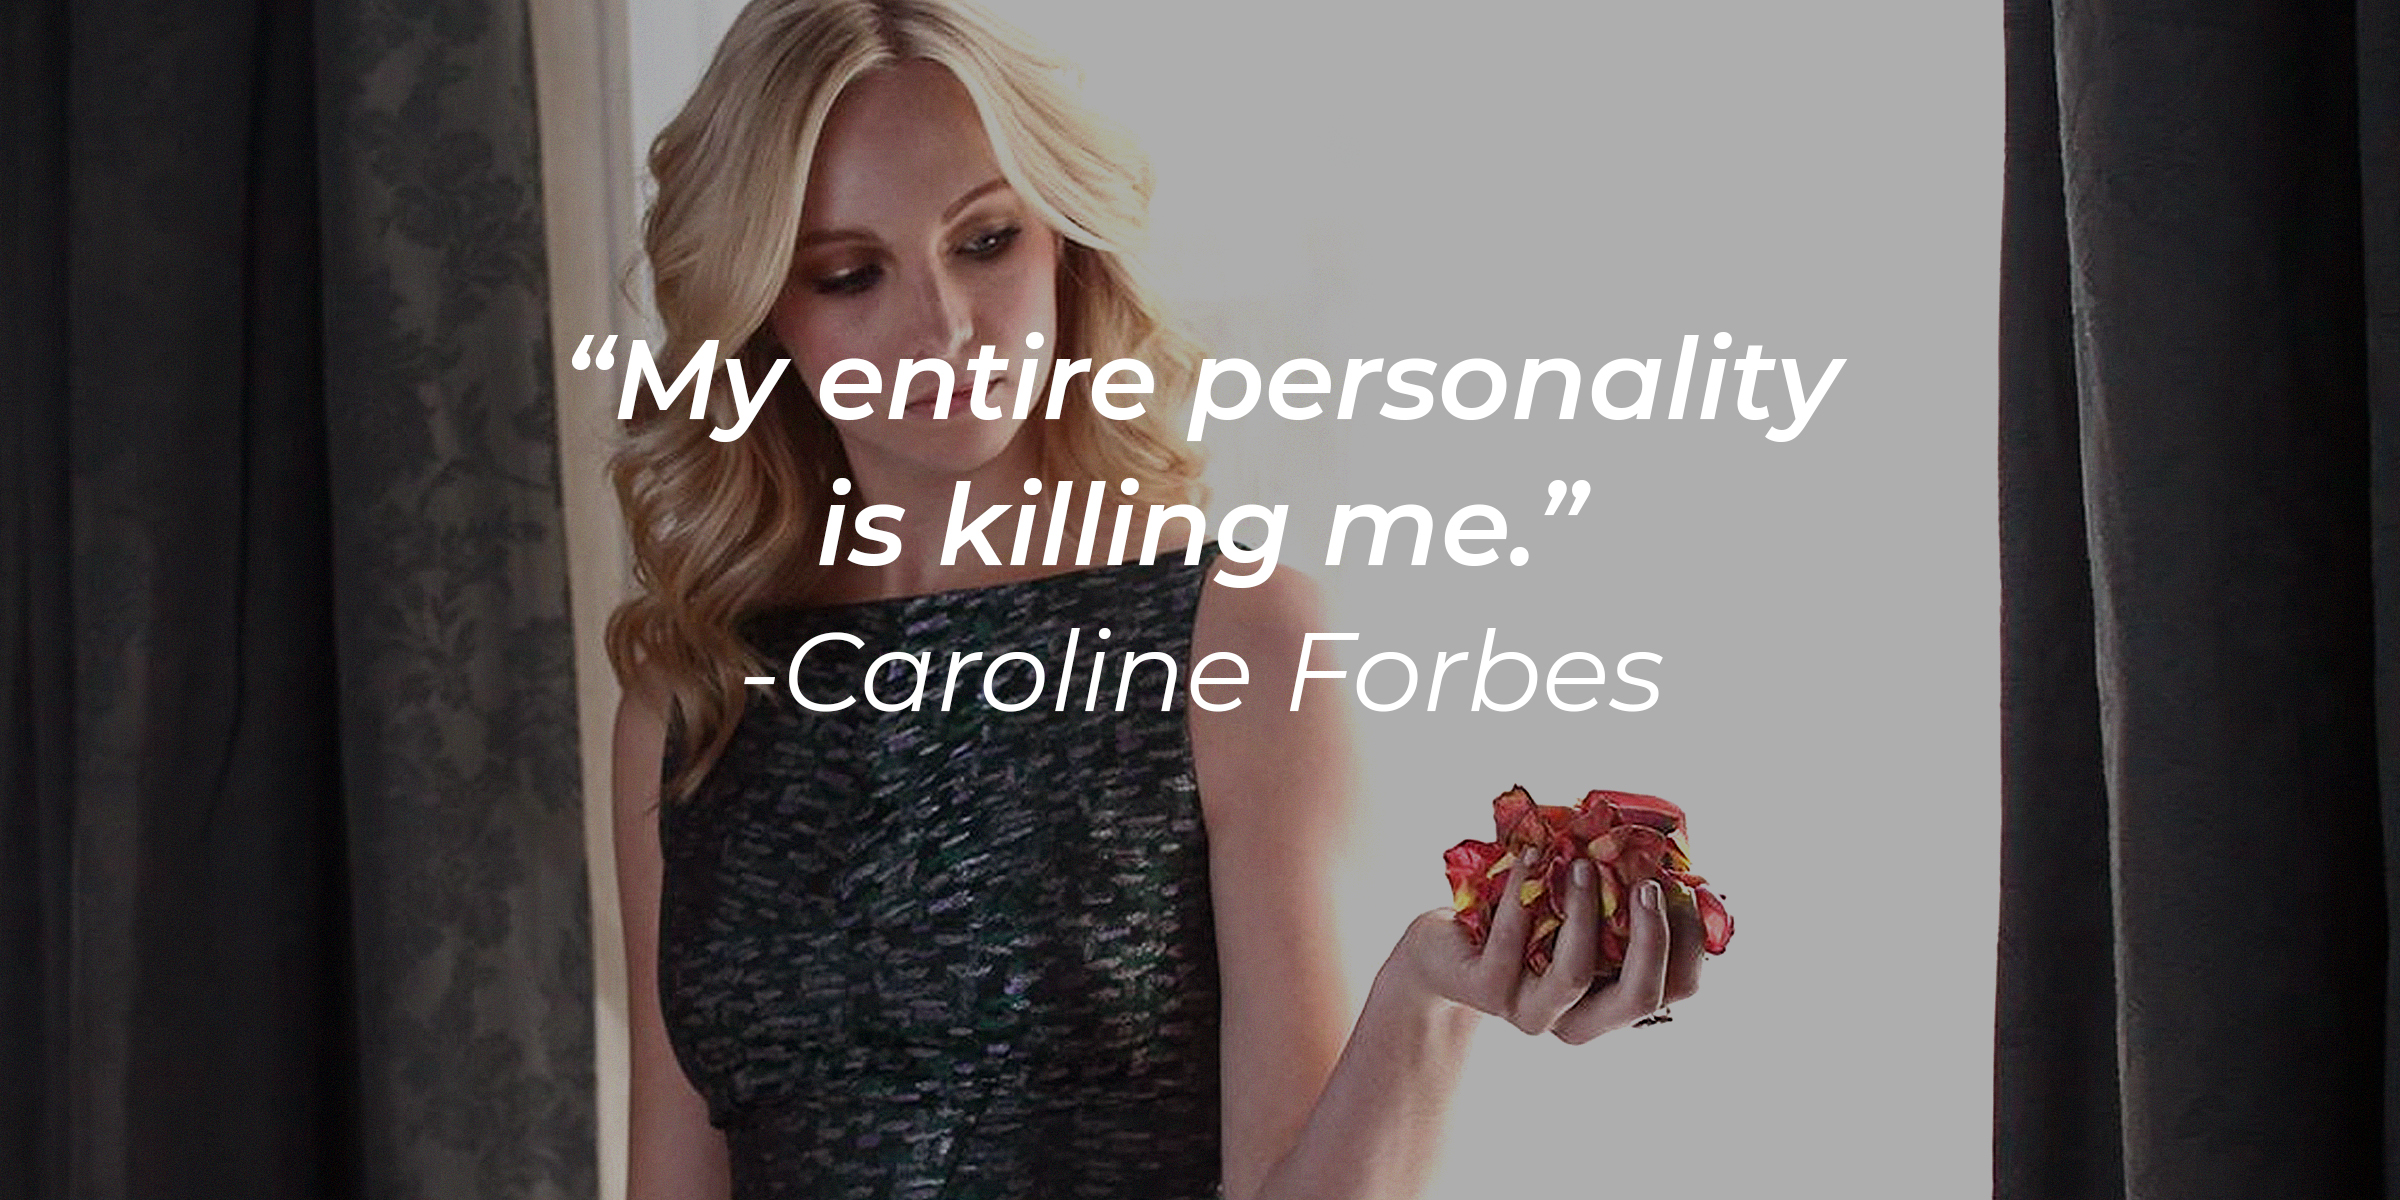 Photo of Caroline Forbes with the quote: "My entire personality is killing me." | Source: Facebook.com/thevampirediaries